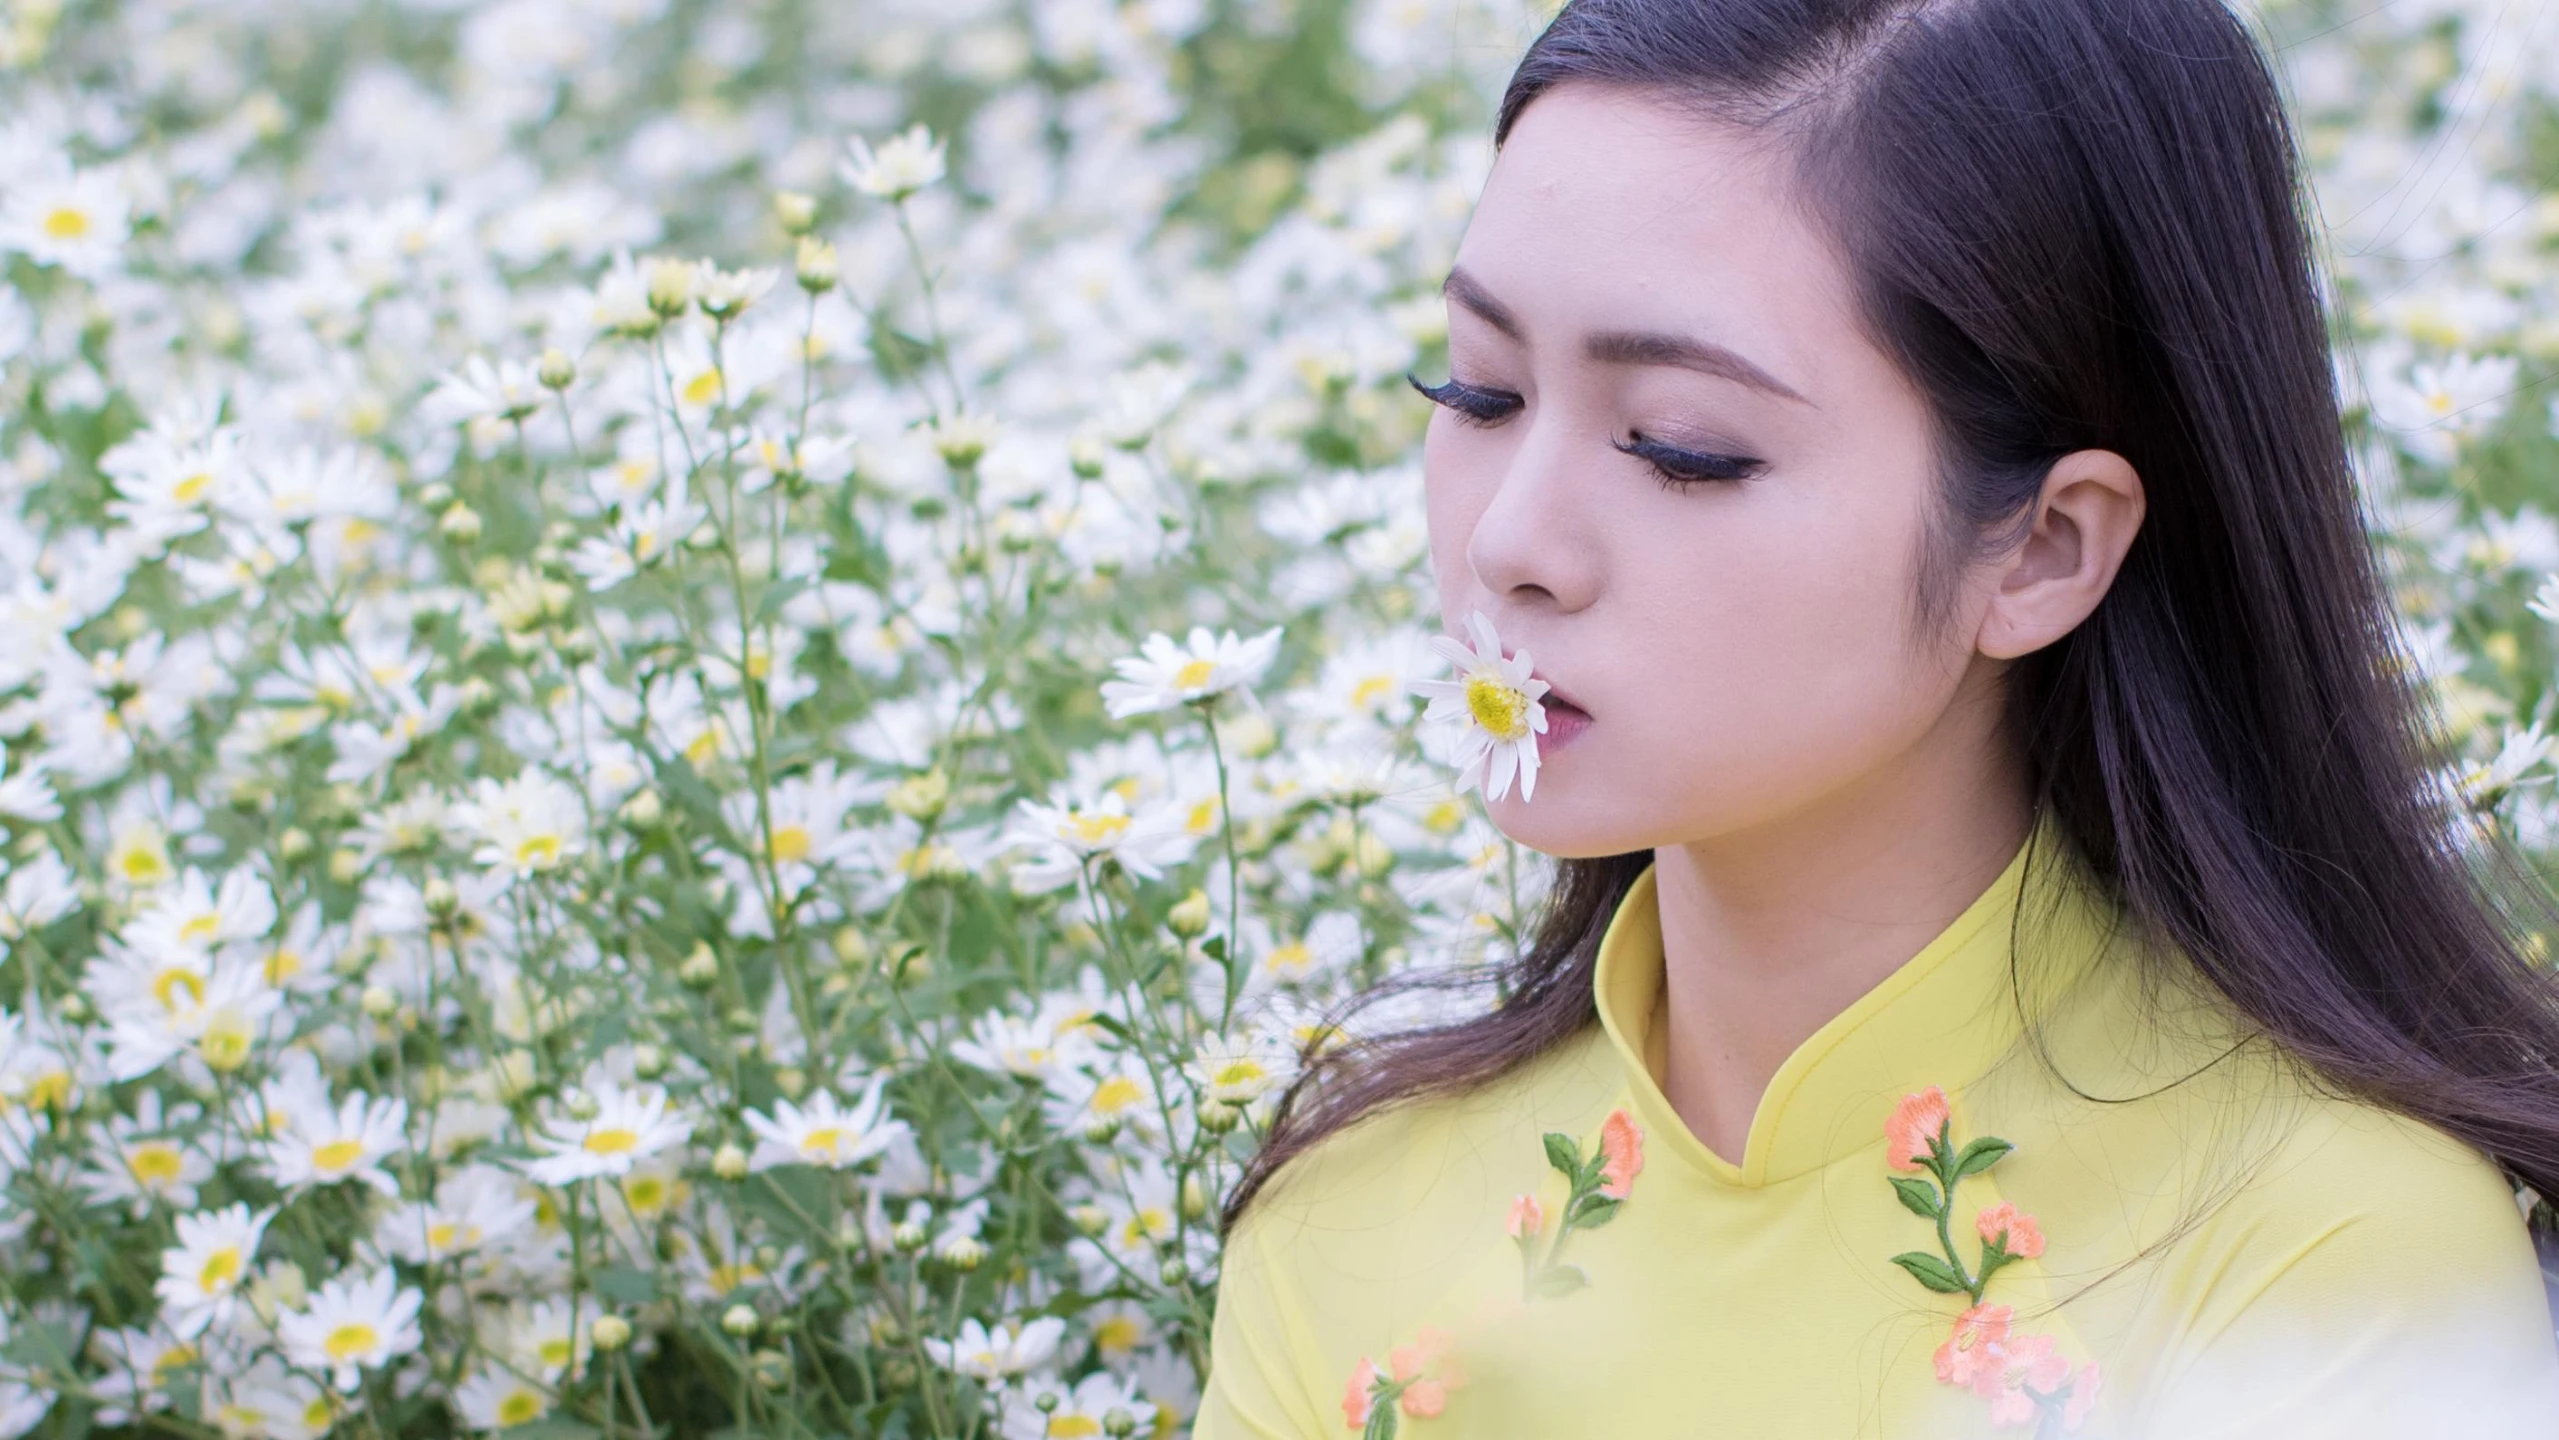 a woman standing in a field of white flowers, inspired by Cui Bai, wearing yellow floral blouse, breathing, vietnamese woman, background image